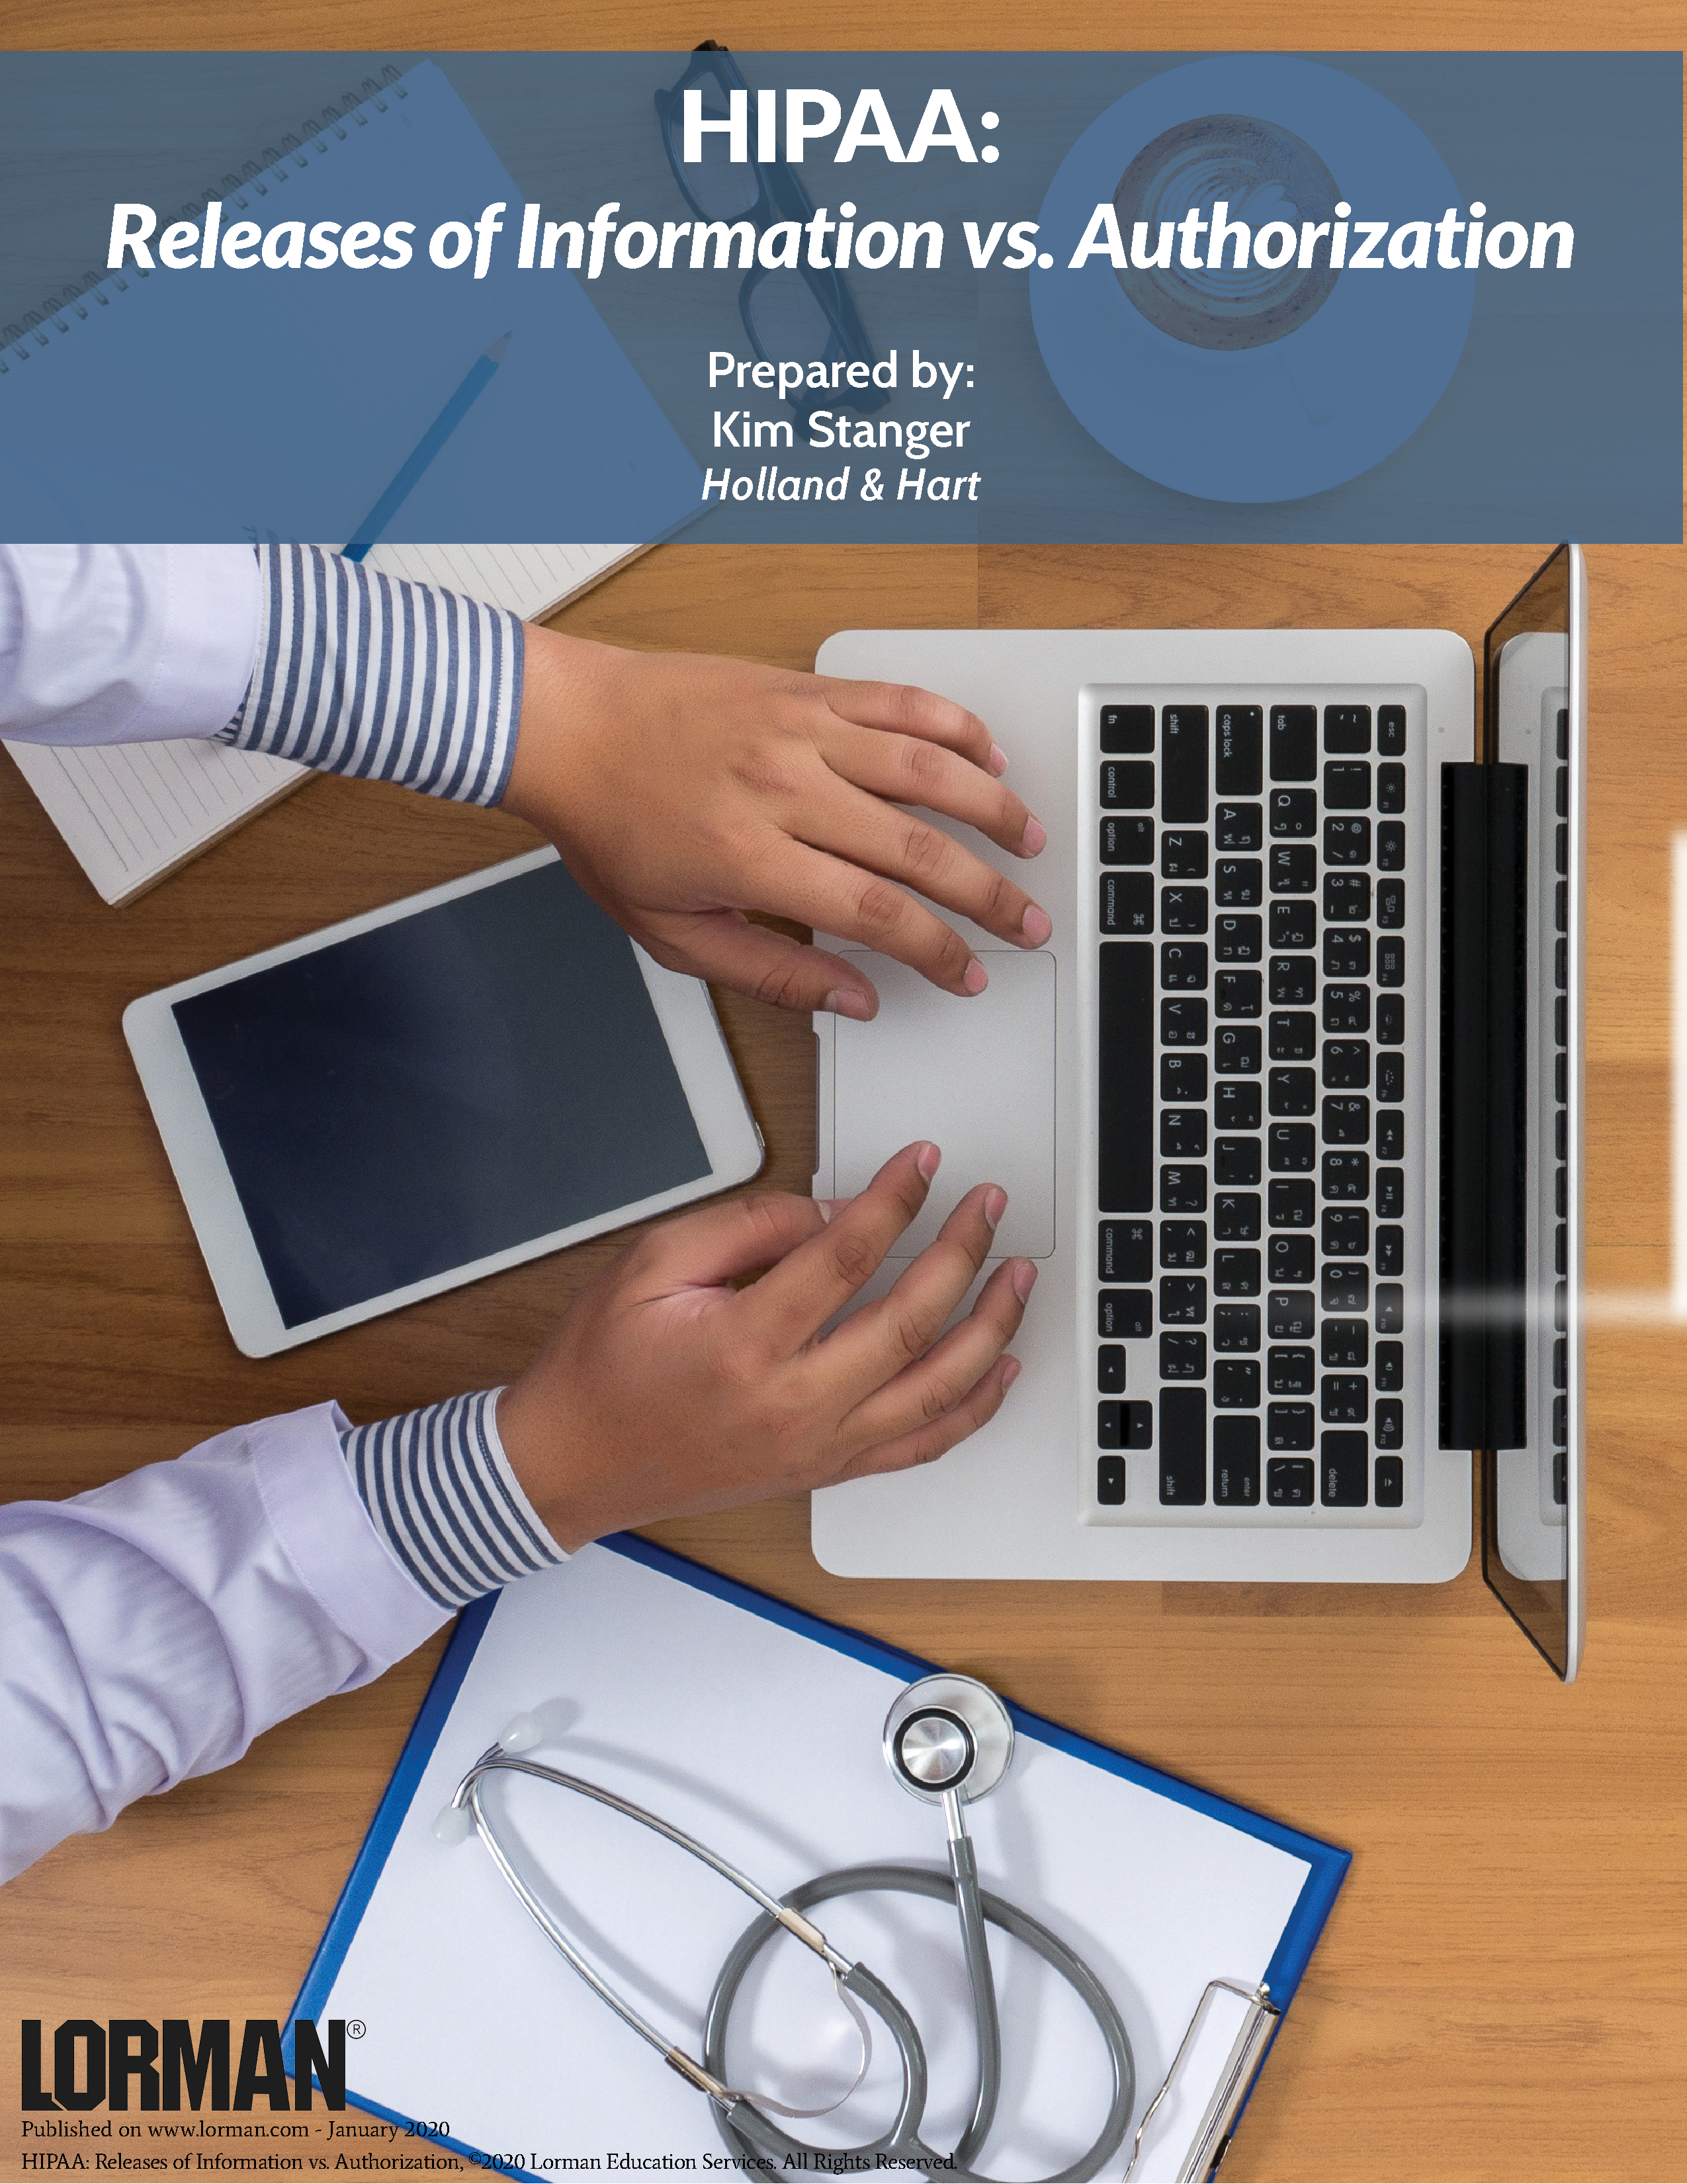 HIPAA: Releases of Information vs. Authorization